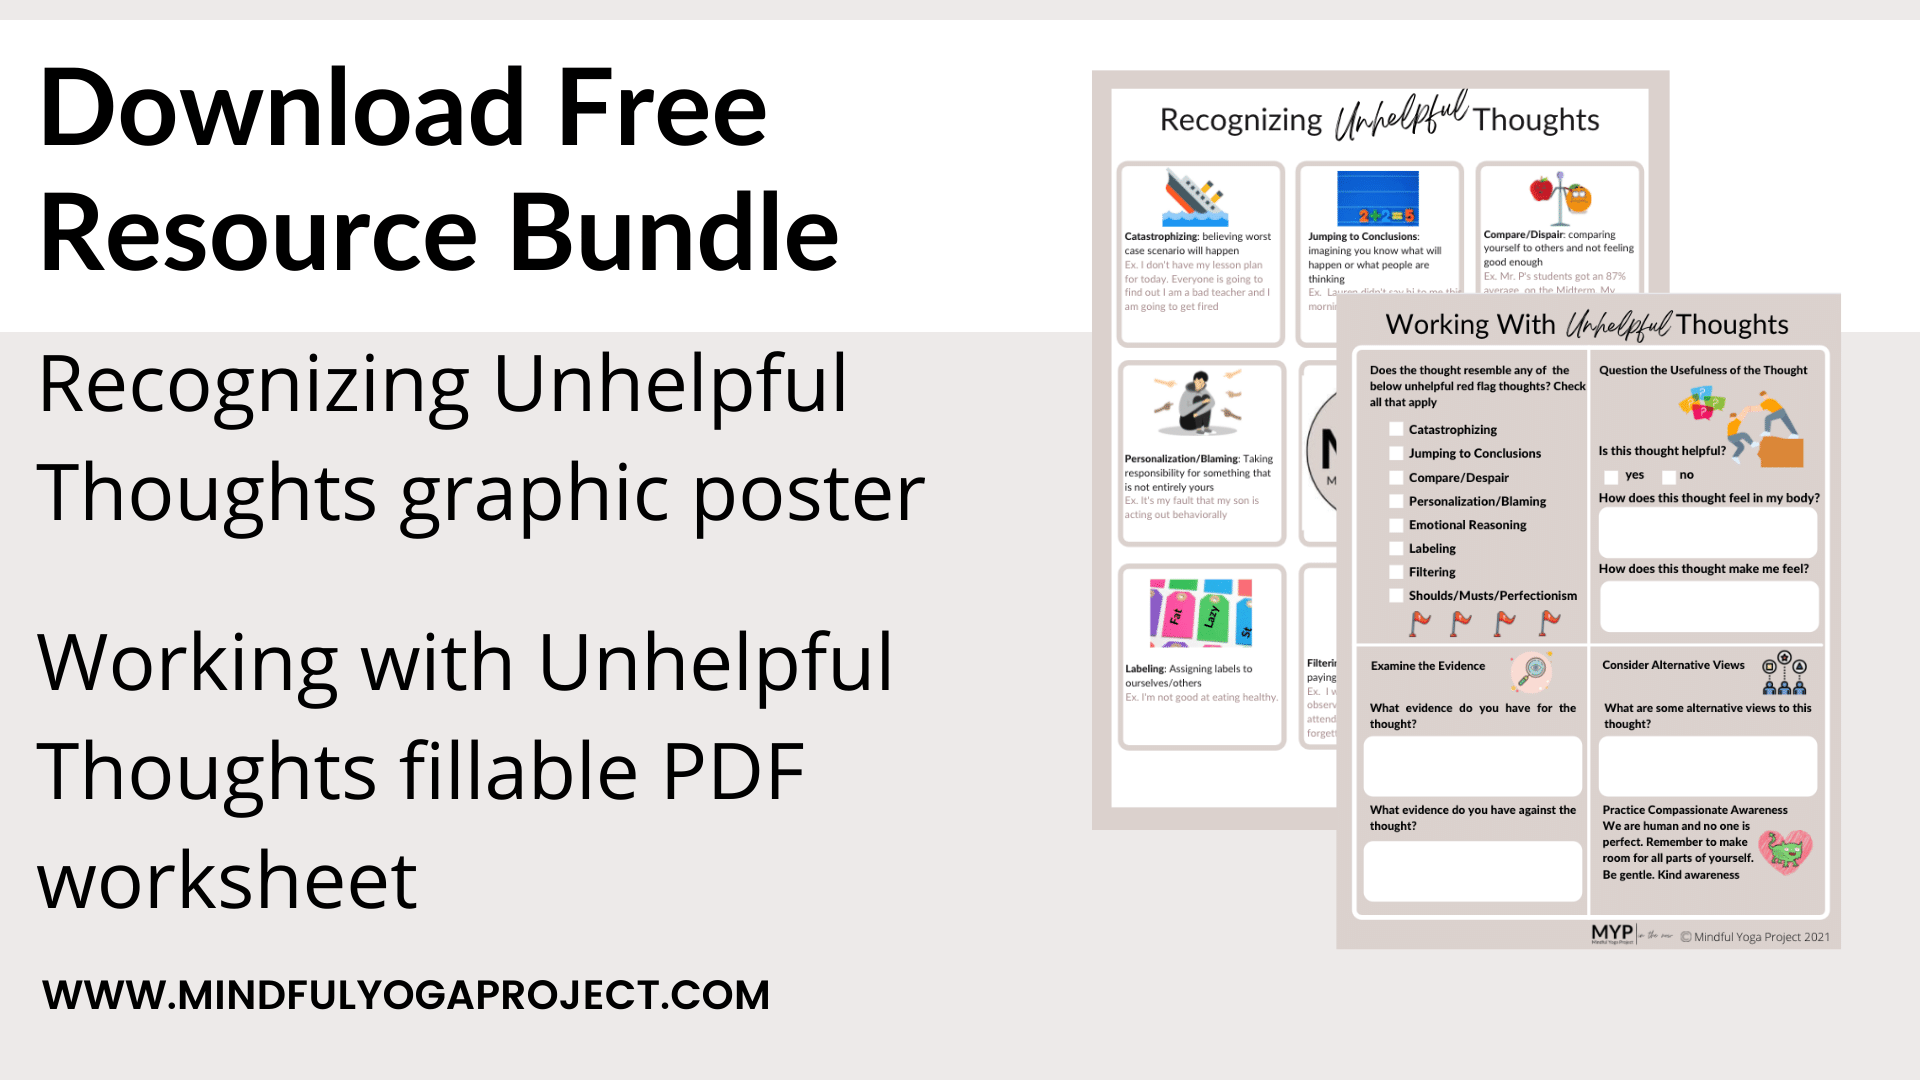 Download Free Resource Bundle: Recognizing Unhelpful Thoughts Graphic Poster and Working with Unhelpful Thoughts Fillable PDF Worksheet